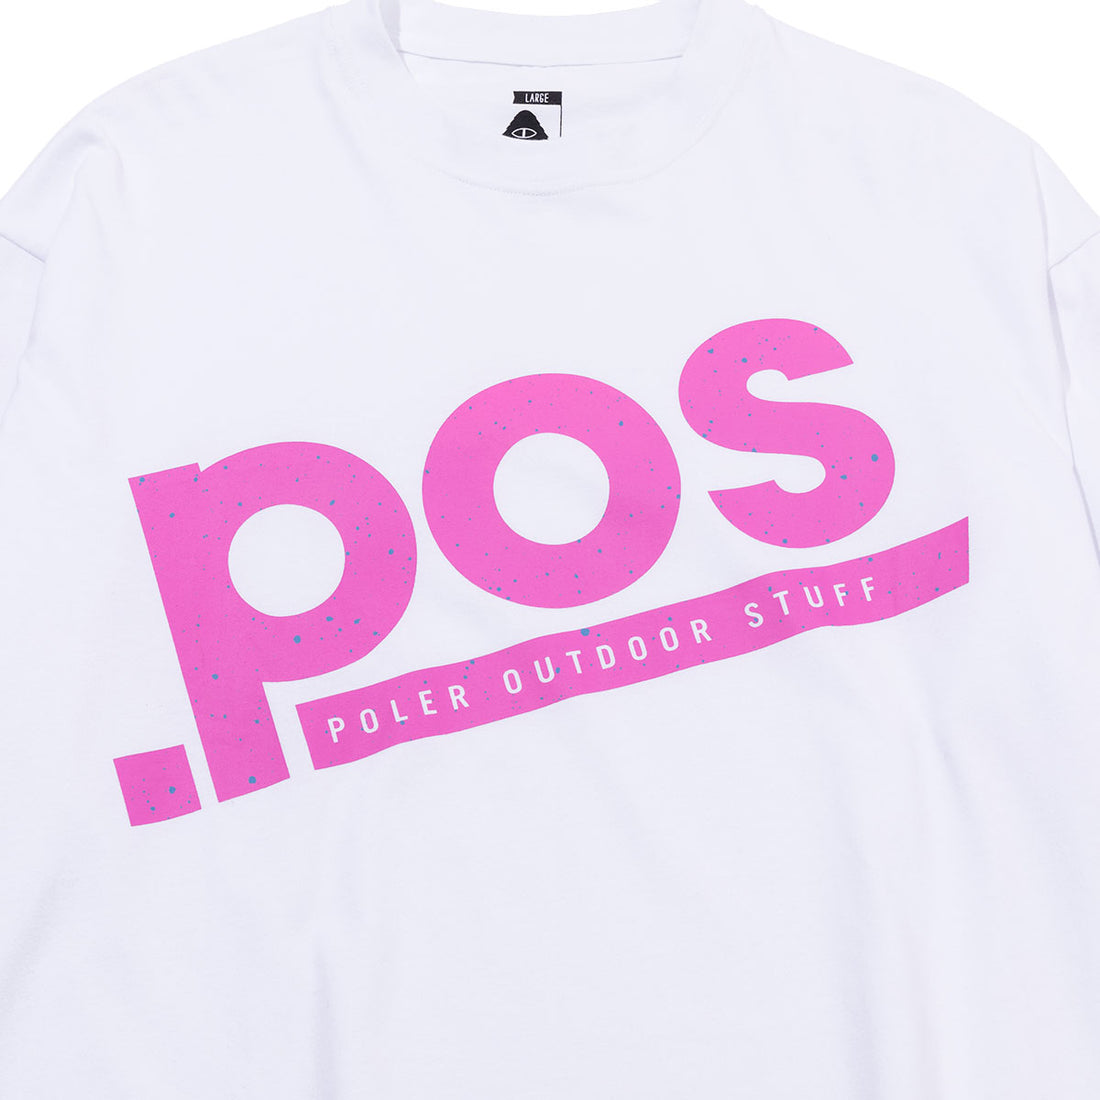 POS RELAX FIT L/S TEE